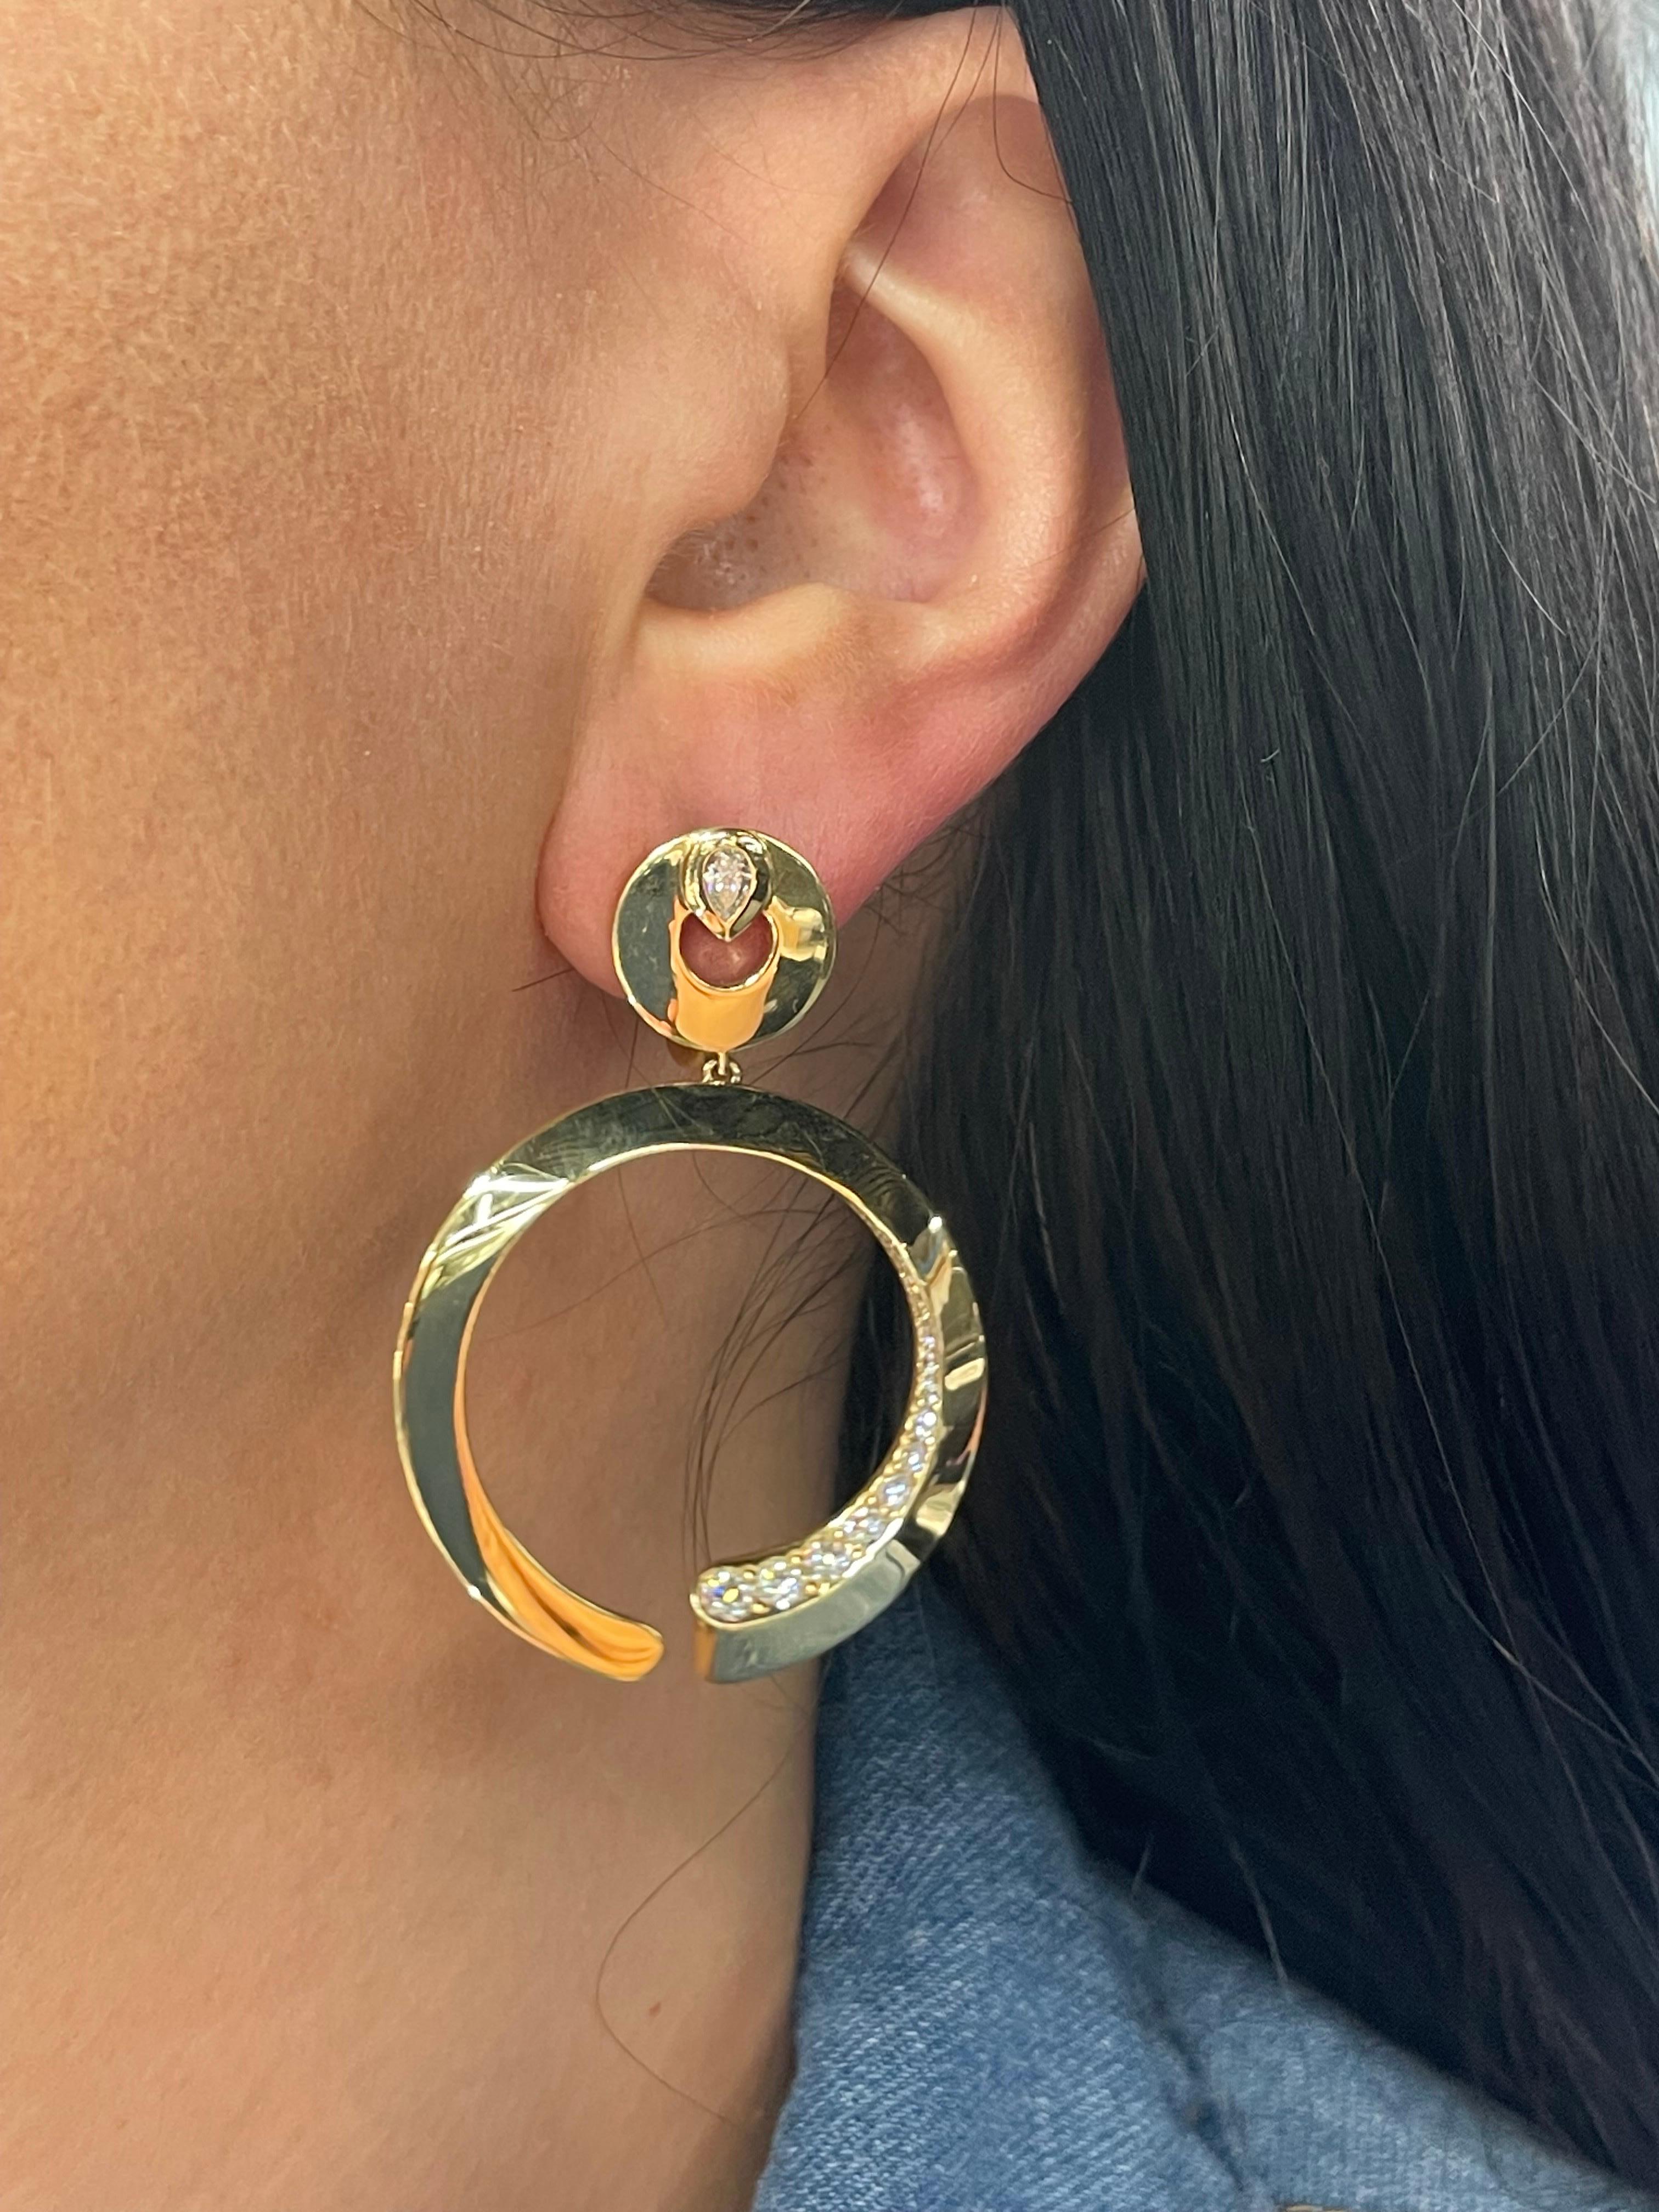 Italian 18 Karat yellow gold drop hoop link earrings featuring 32 round brilliants and two pear shapes weighing 1.20 carats.
Color F
Clarity VS
Designer: Crivelli Jewelry 

Hoop bottom measures 1.38 inches wide